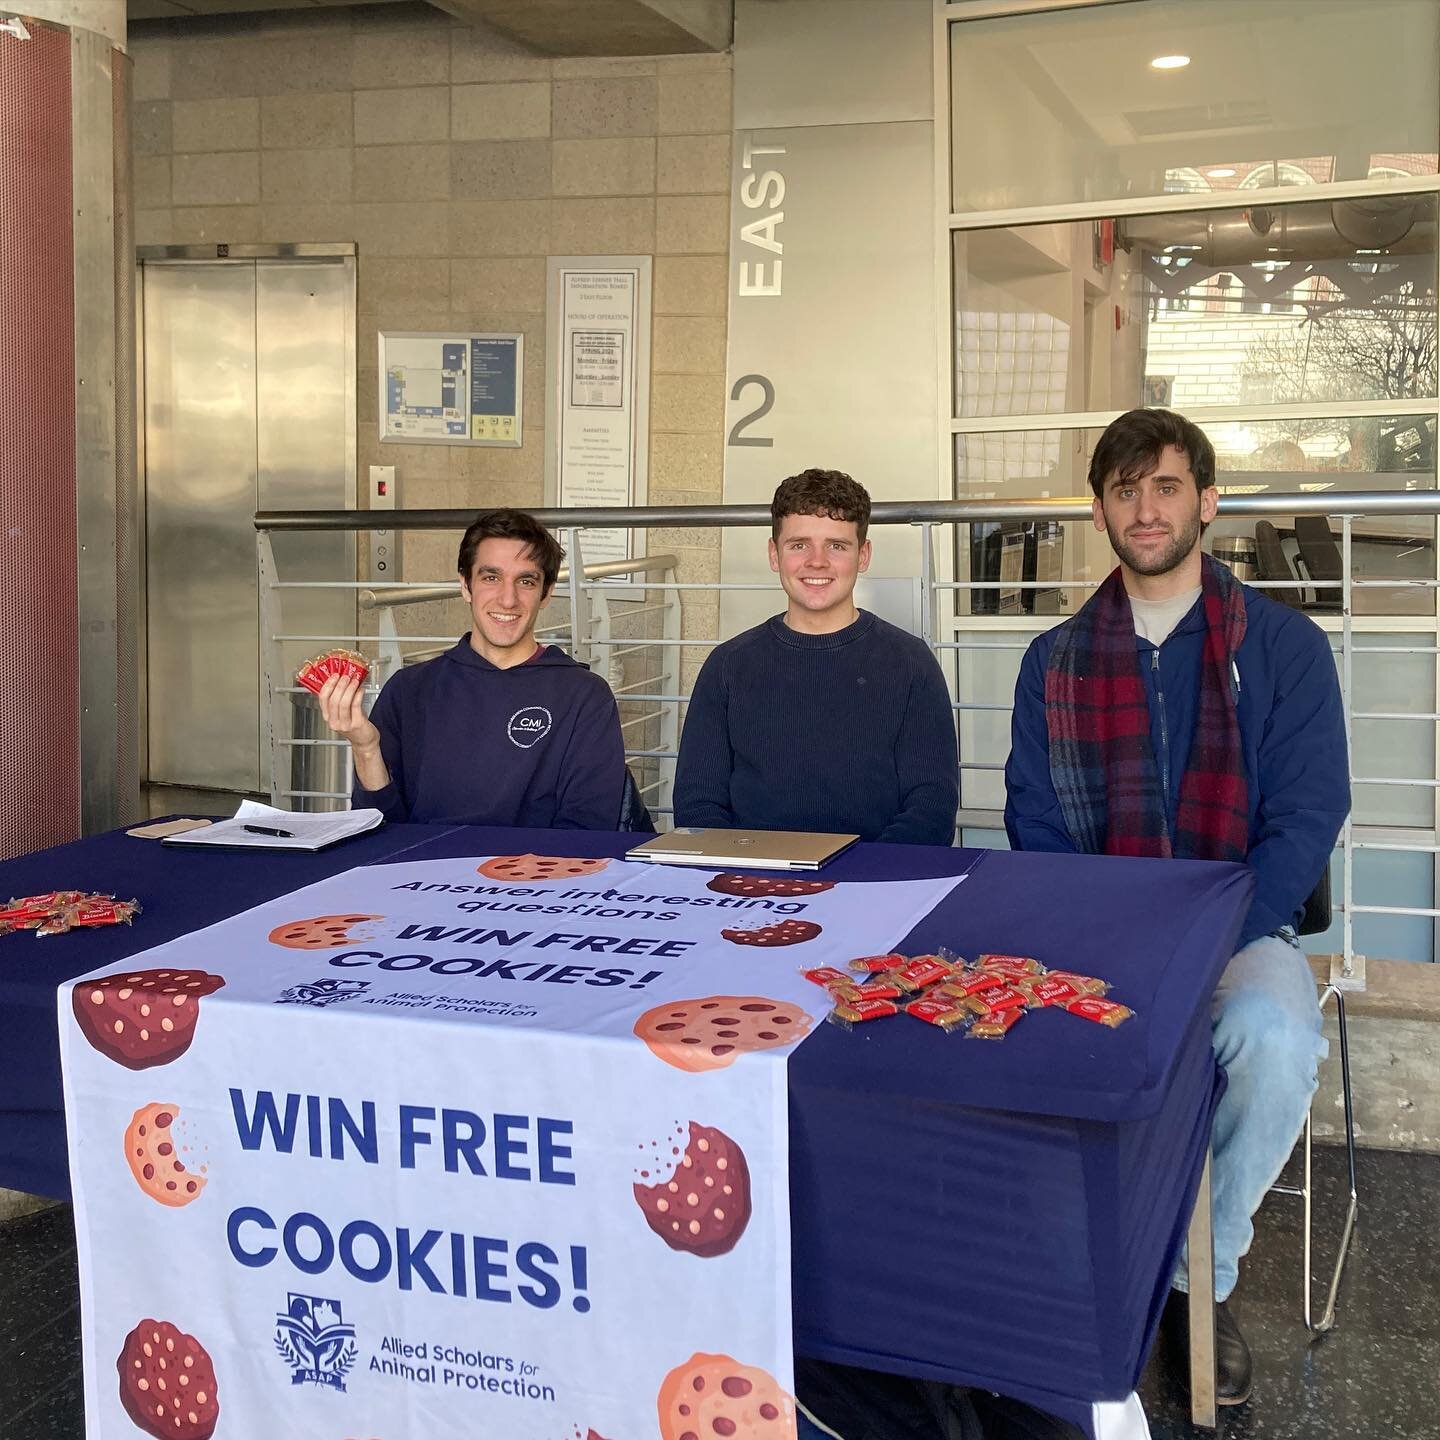 We out here. Free cookies every time :)